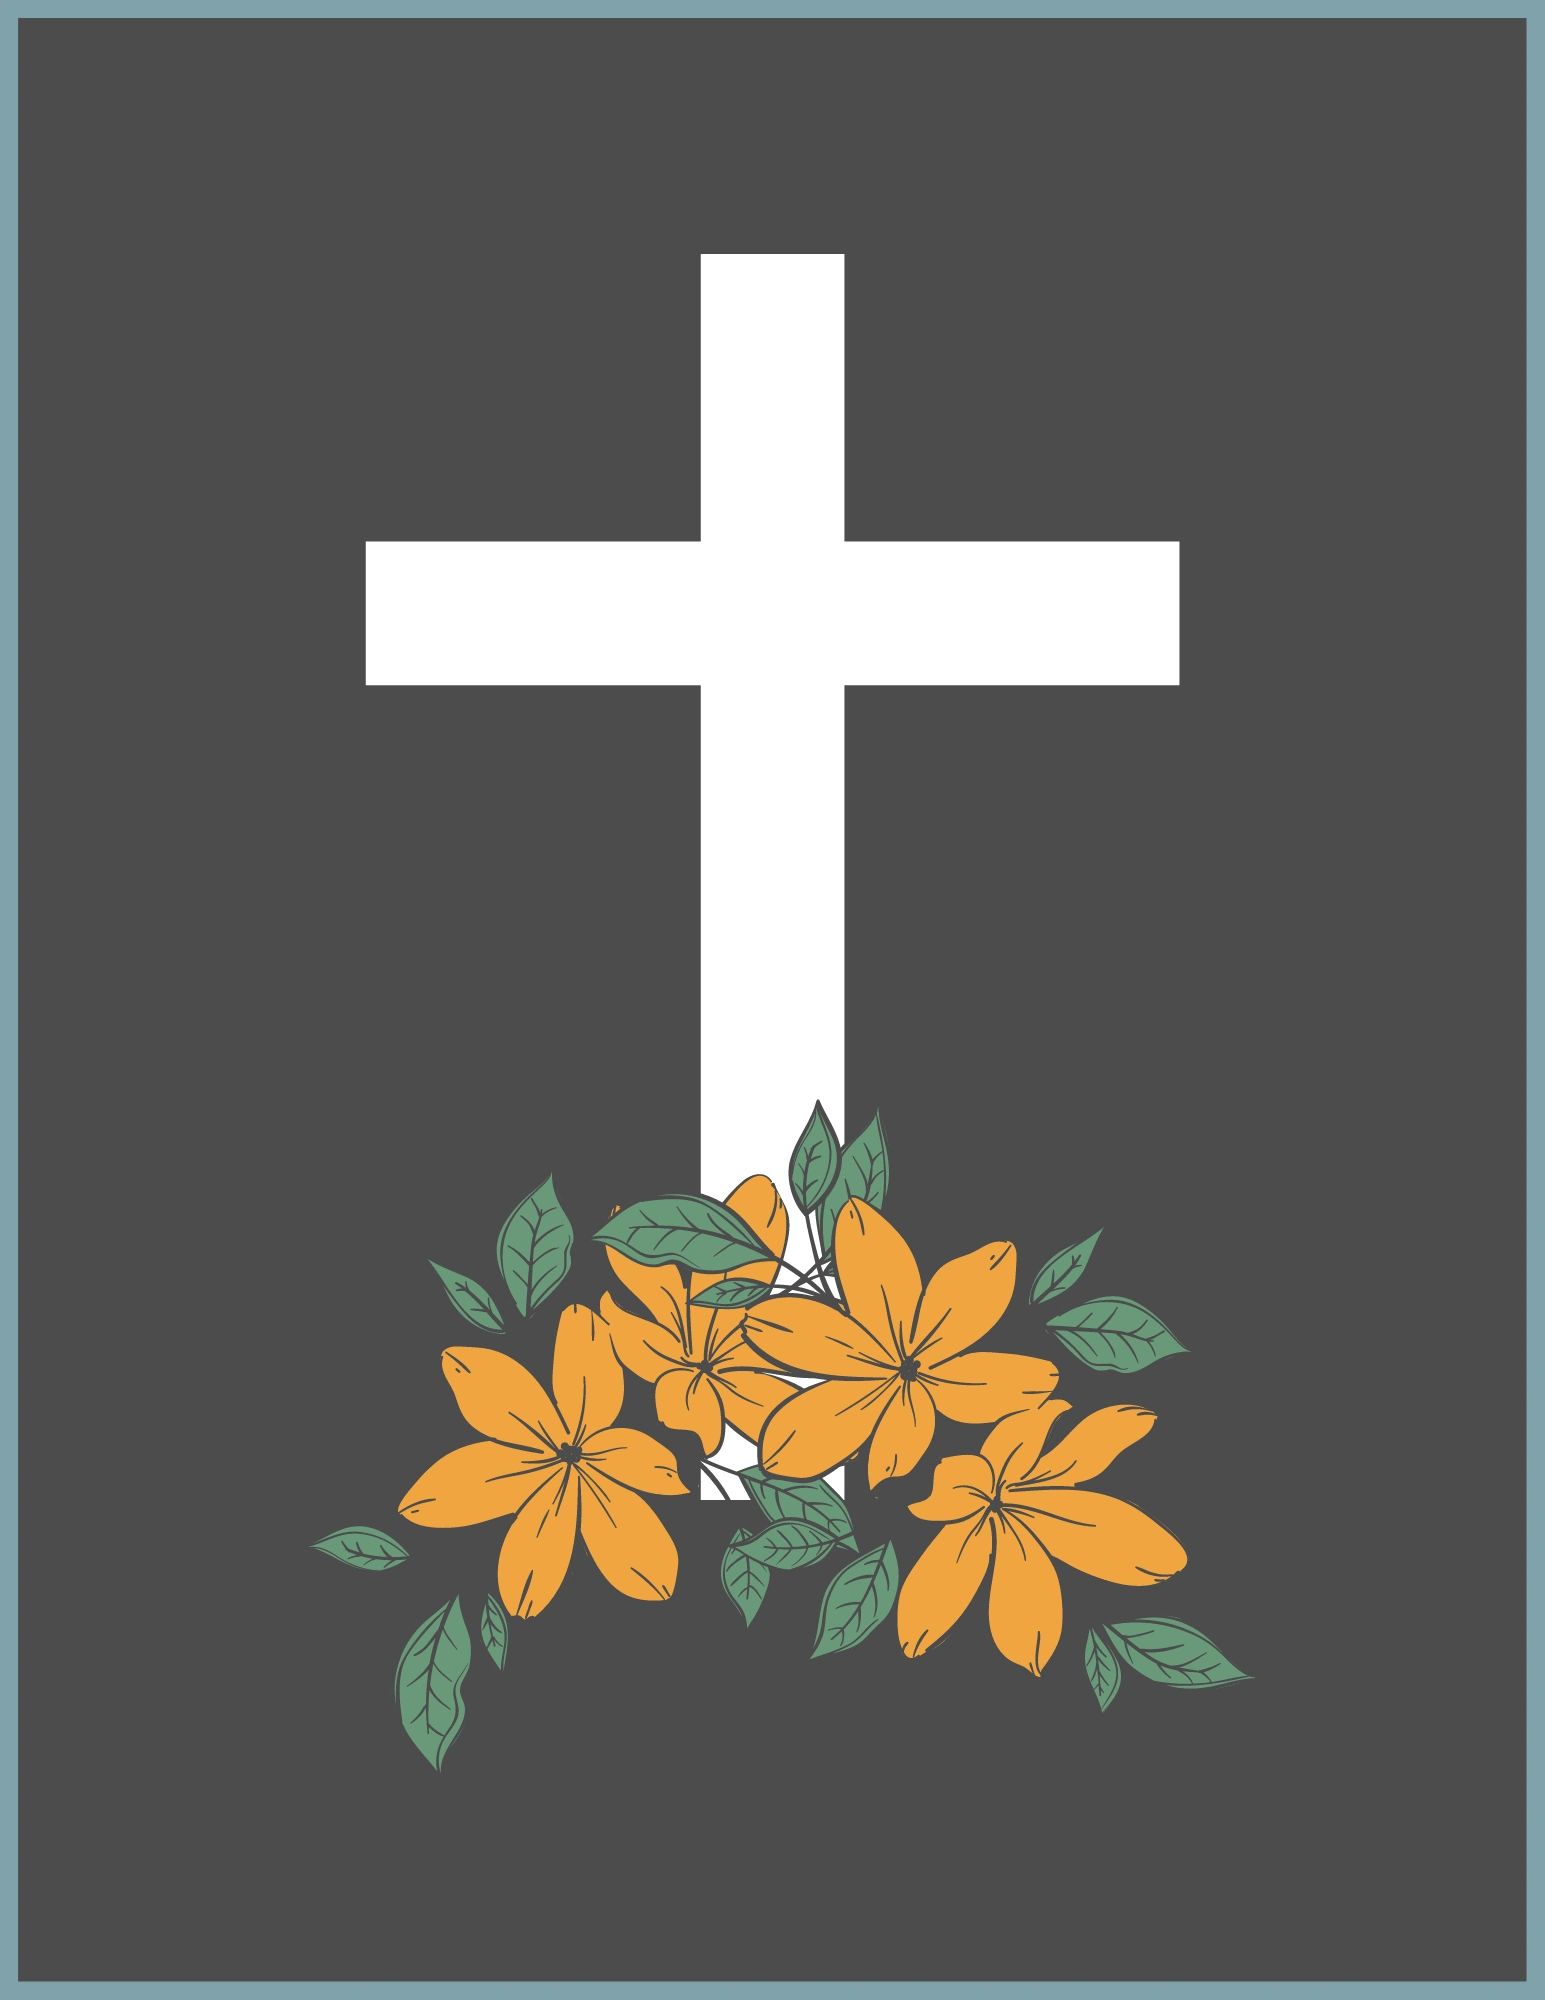 christian funeral backgrounds